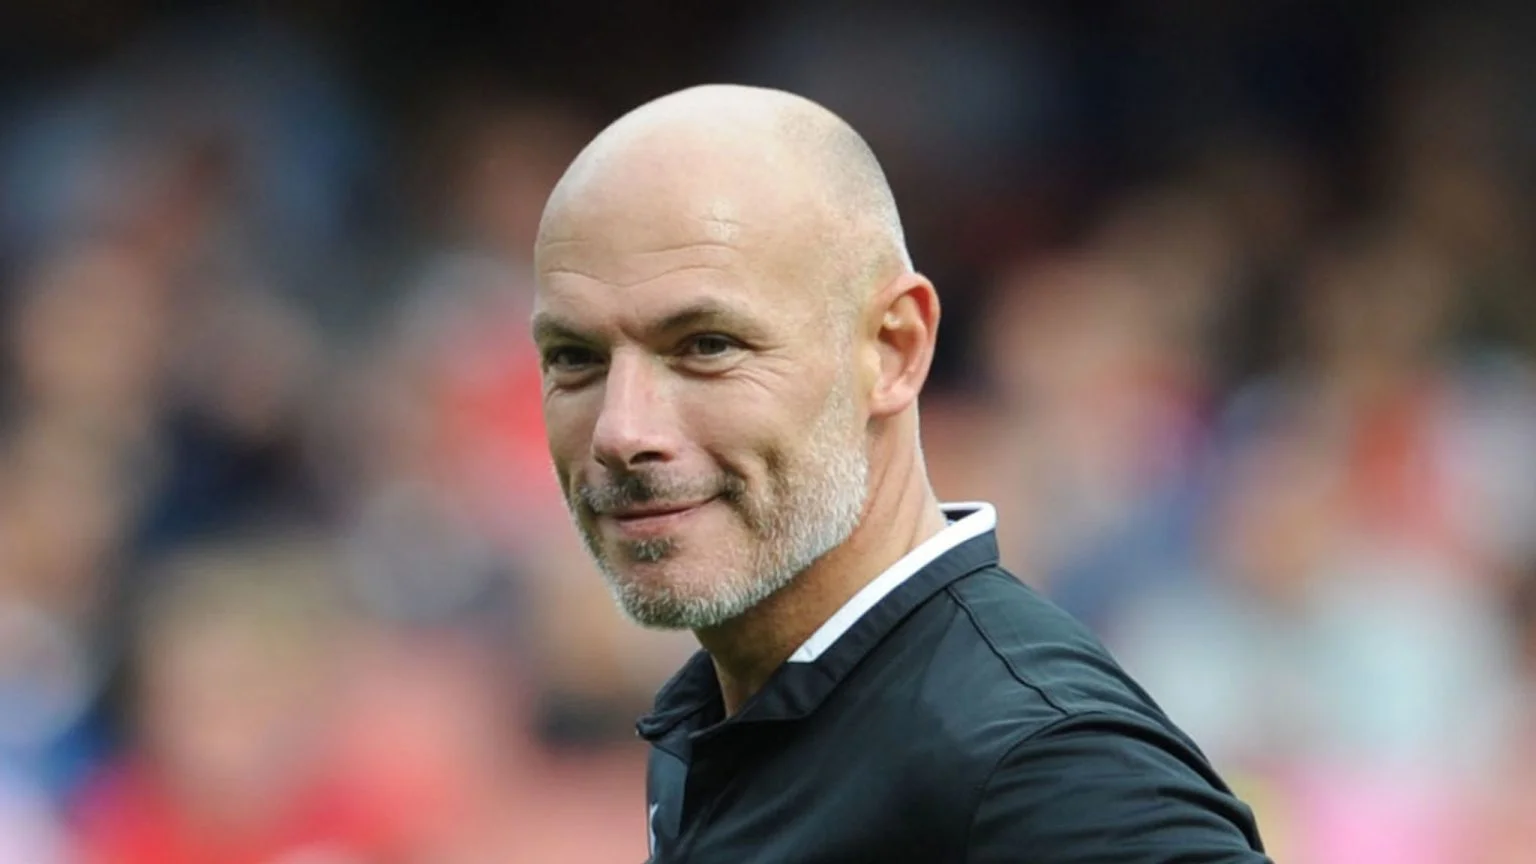 EPL: Howard Webb reveals two wrong decisions made in Newcastle’s 1-0 win over Arsenal